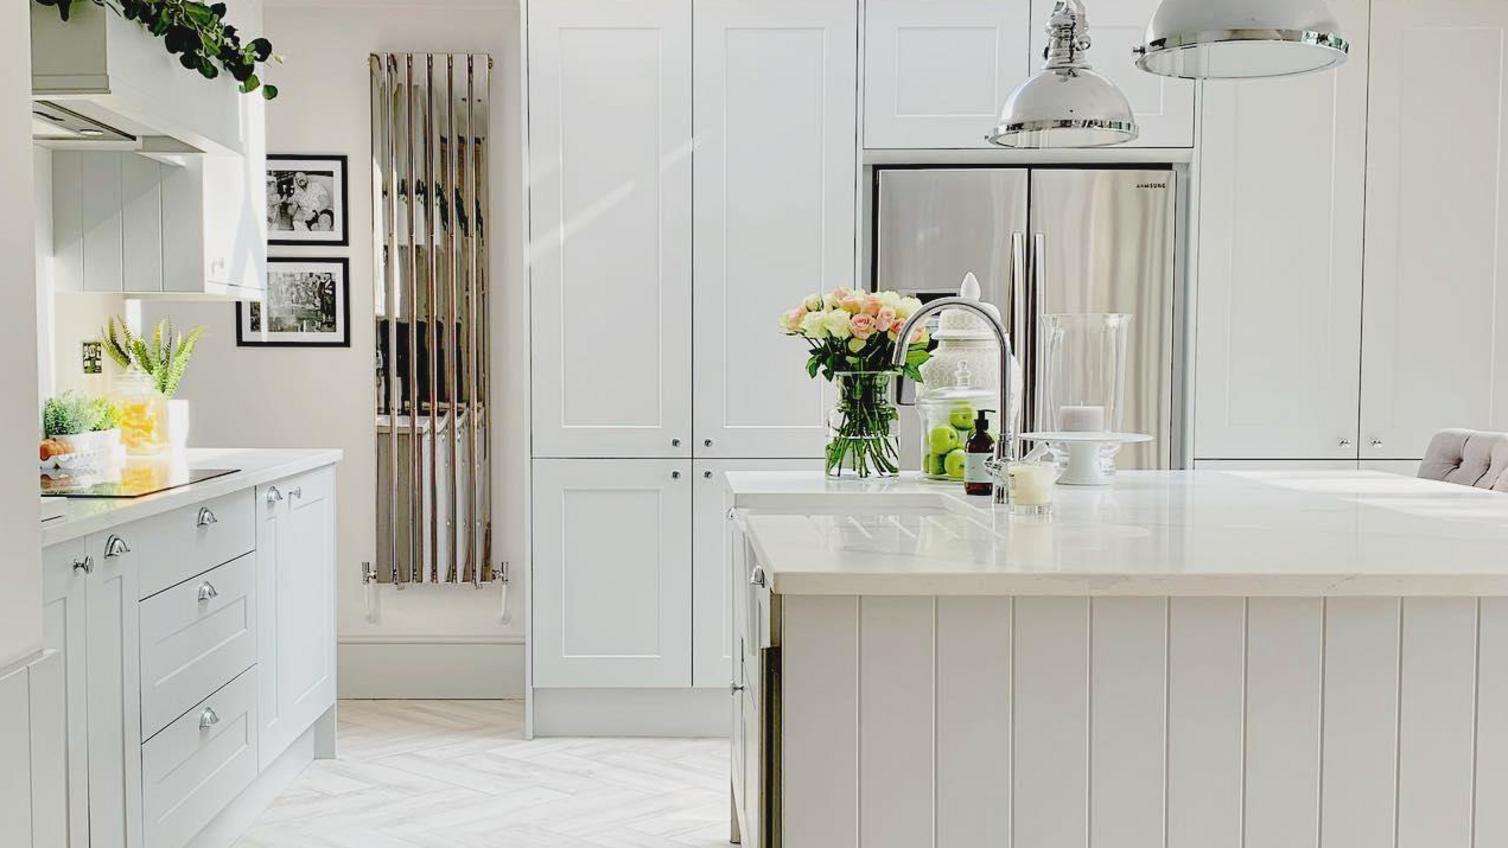 Light grey classic kitchen idea with island layout, panelling, chevron flooring and chrome fixtures.